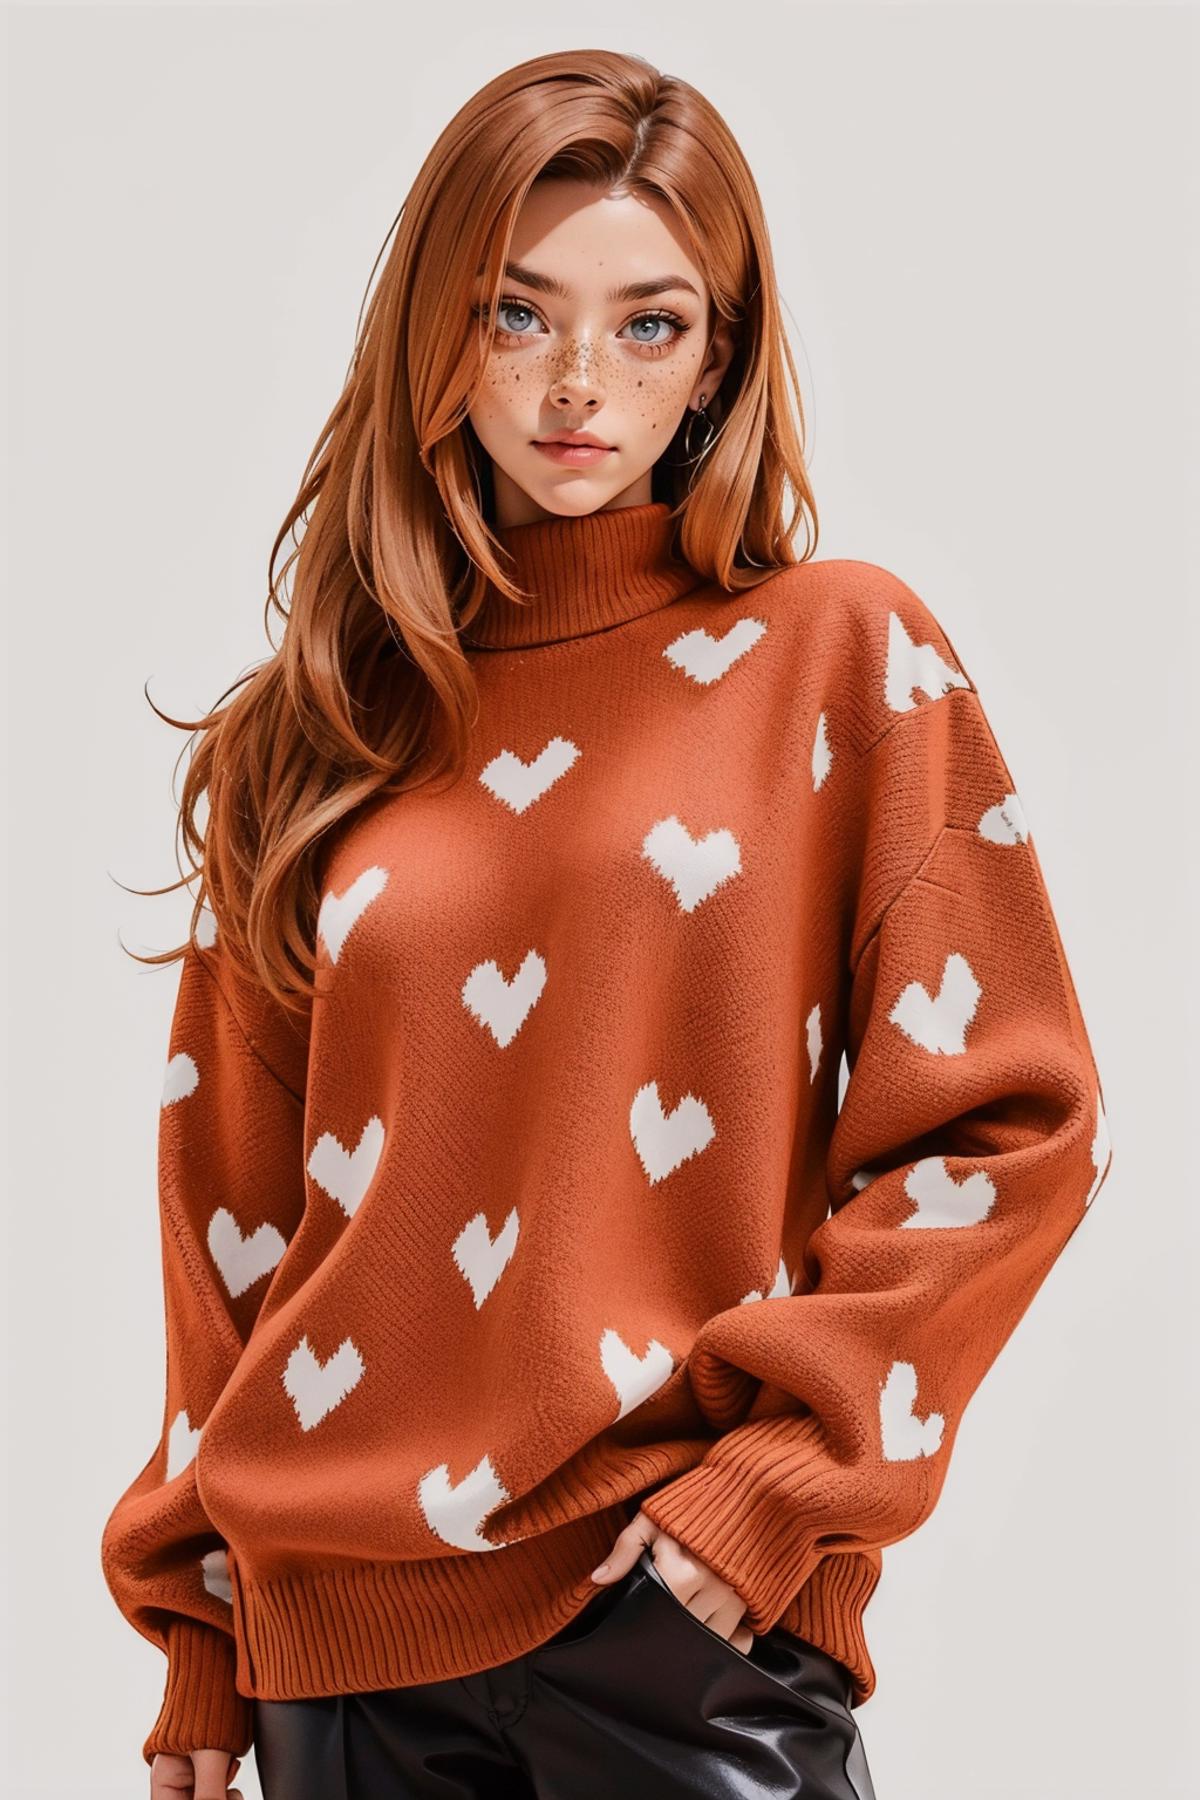 A young woman wearing a heart-patterned sweater.